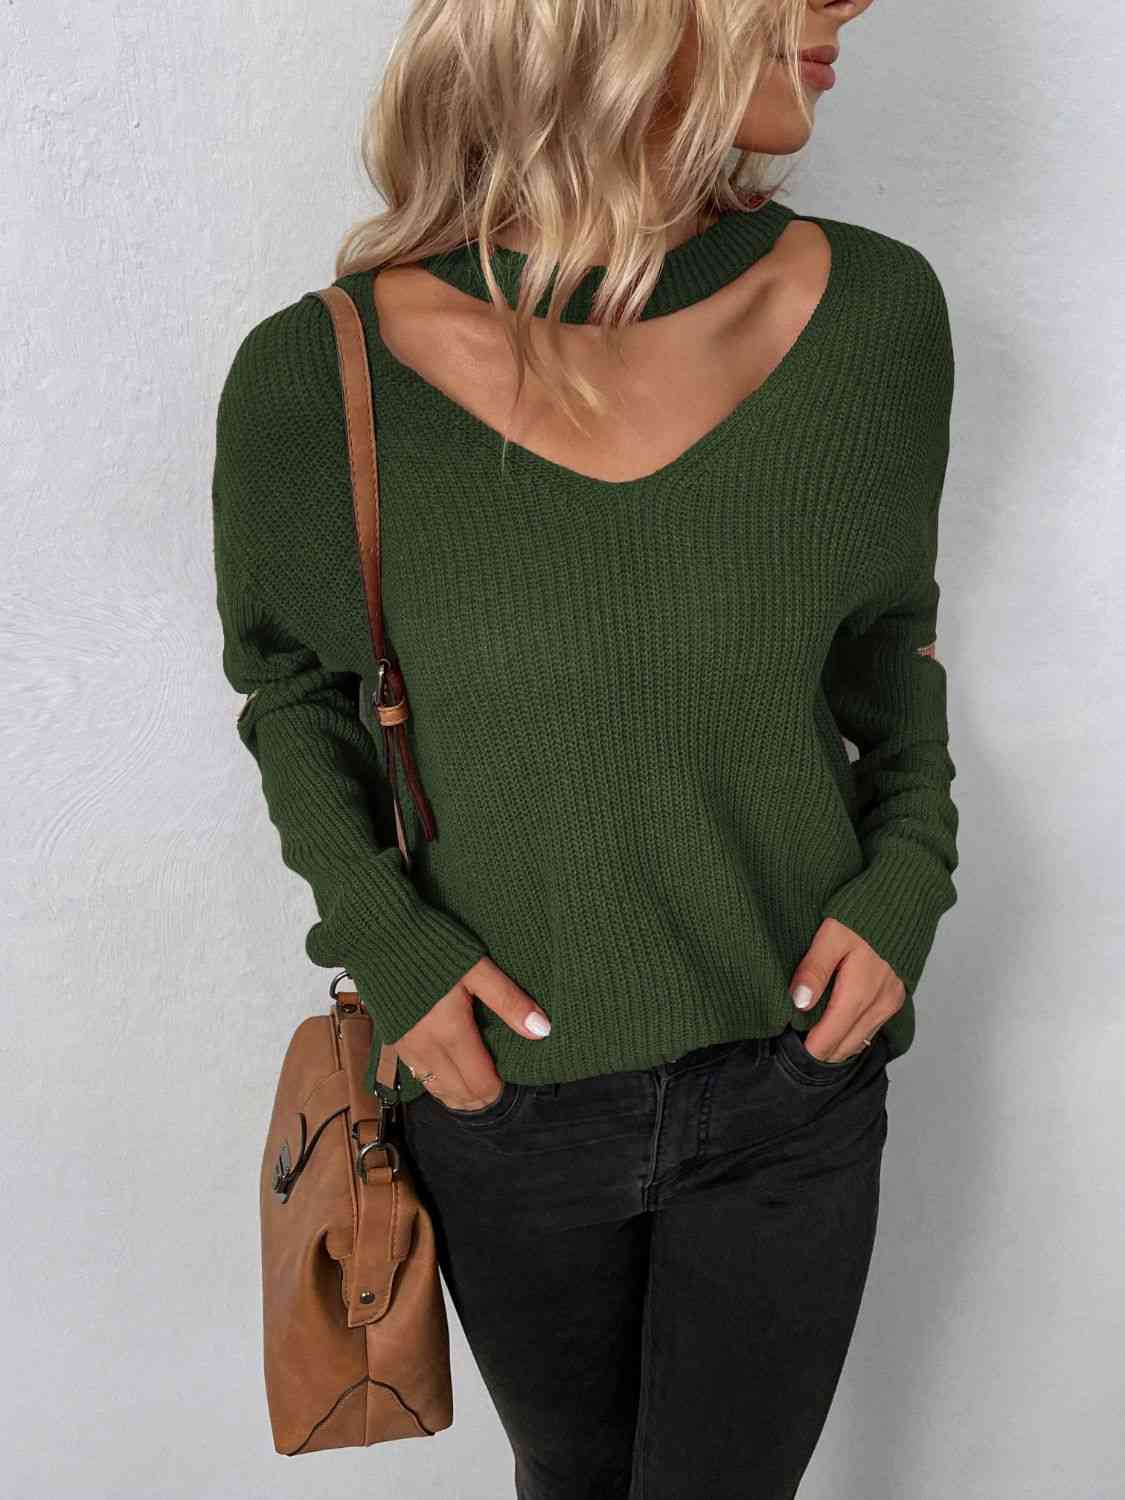 Sleek Seduction Cut-Out Sweater with Zip-Up Detail and Choker